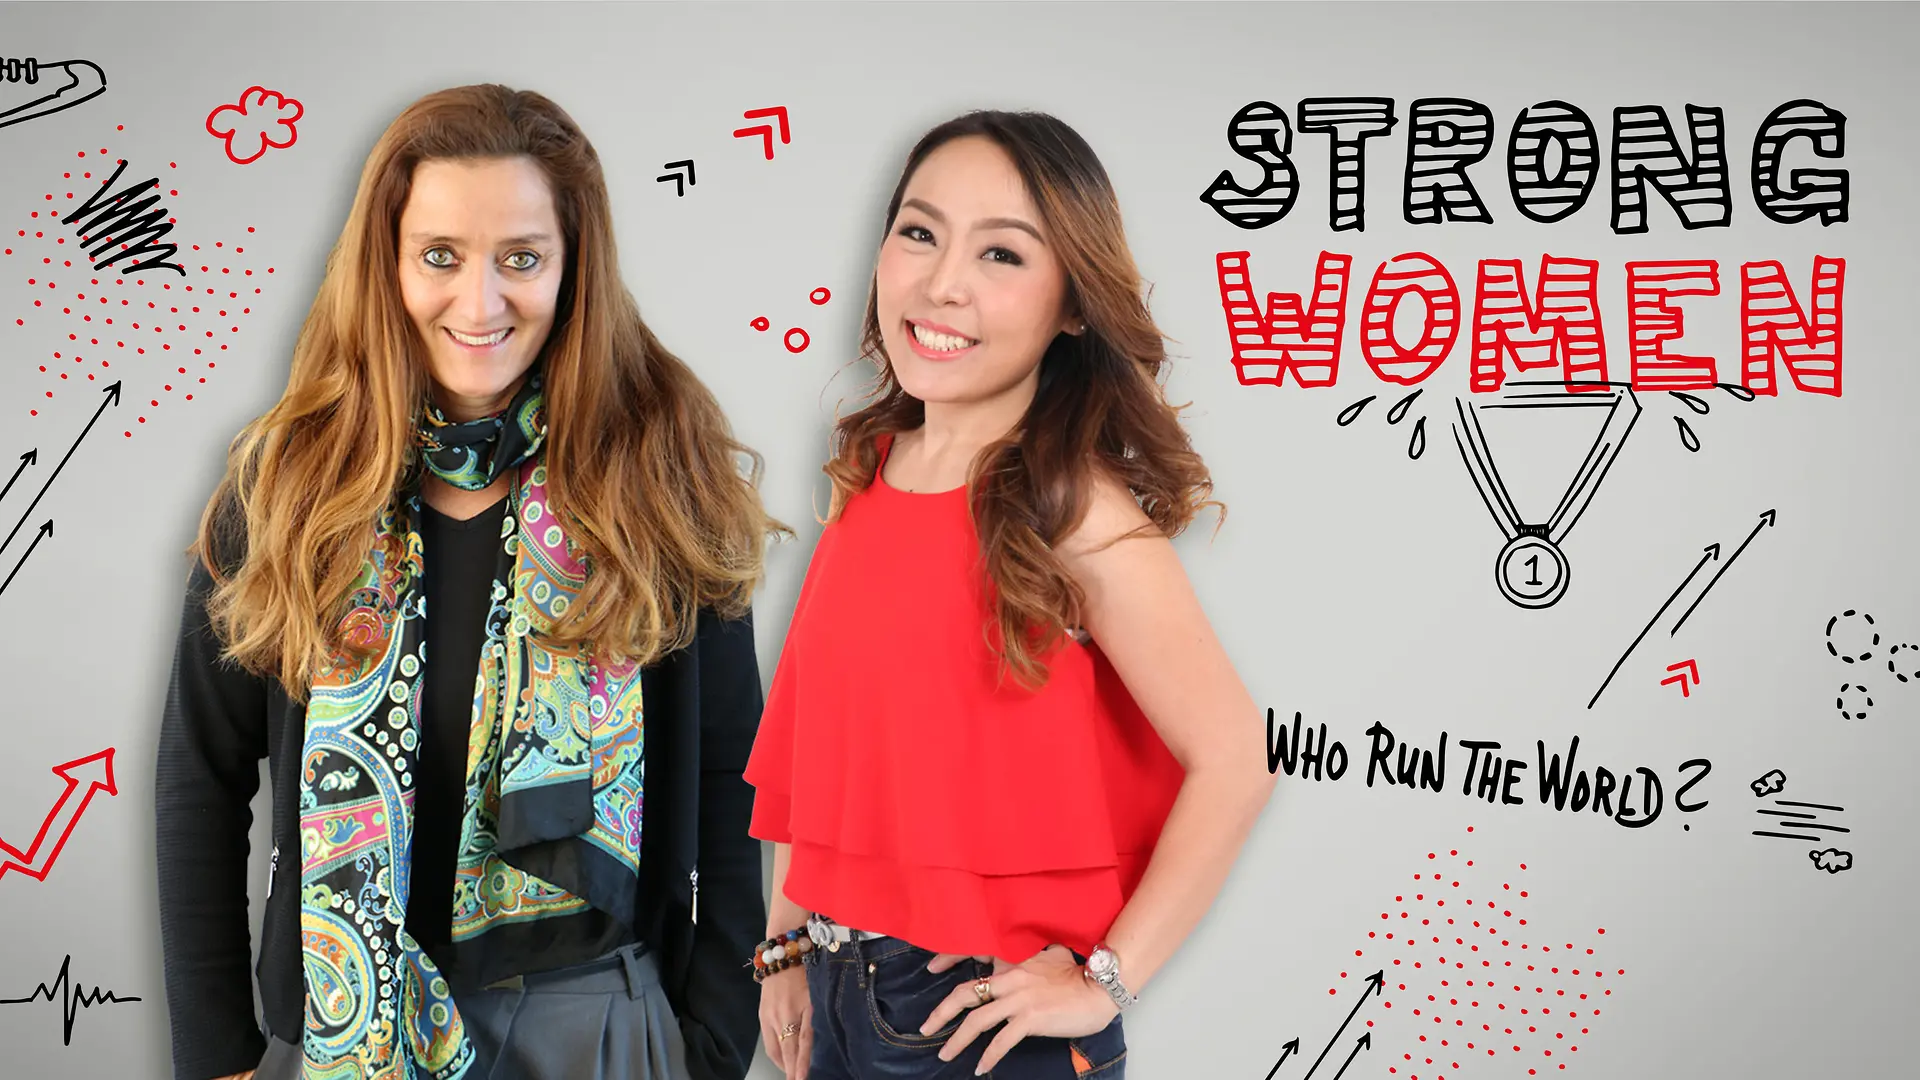 Strong women: Rapeephan Chiraphichet and Claudia Wittfoth